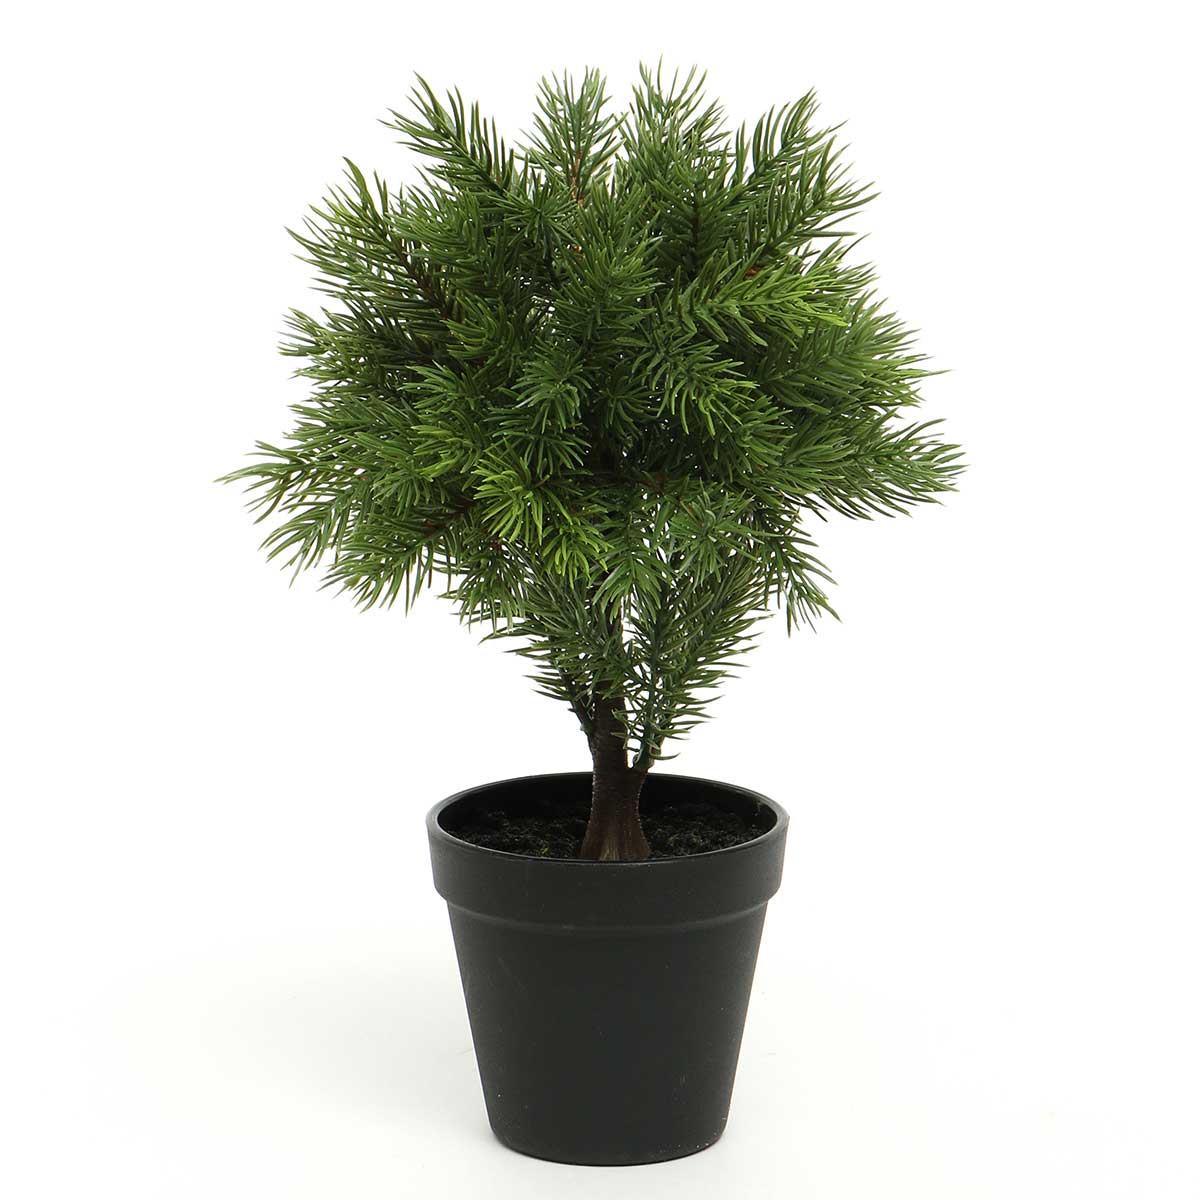 BALSAM FIR TOPIARY TREE IN vv22